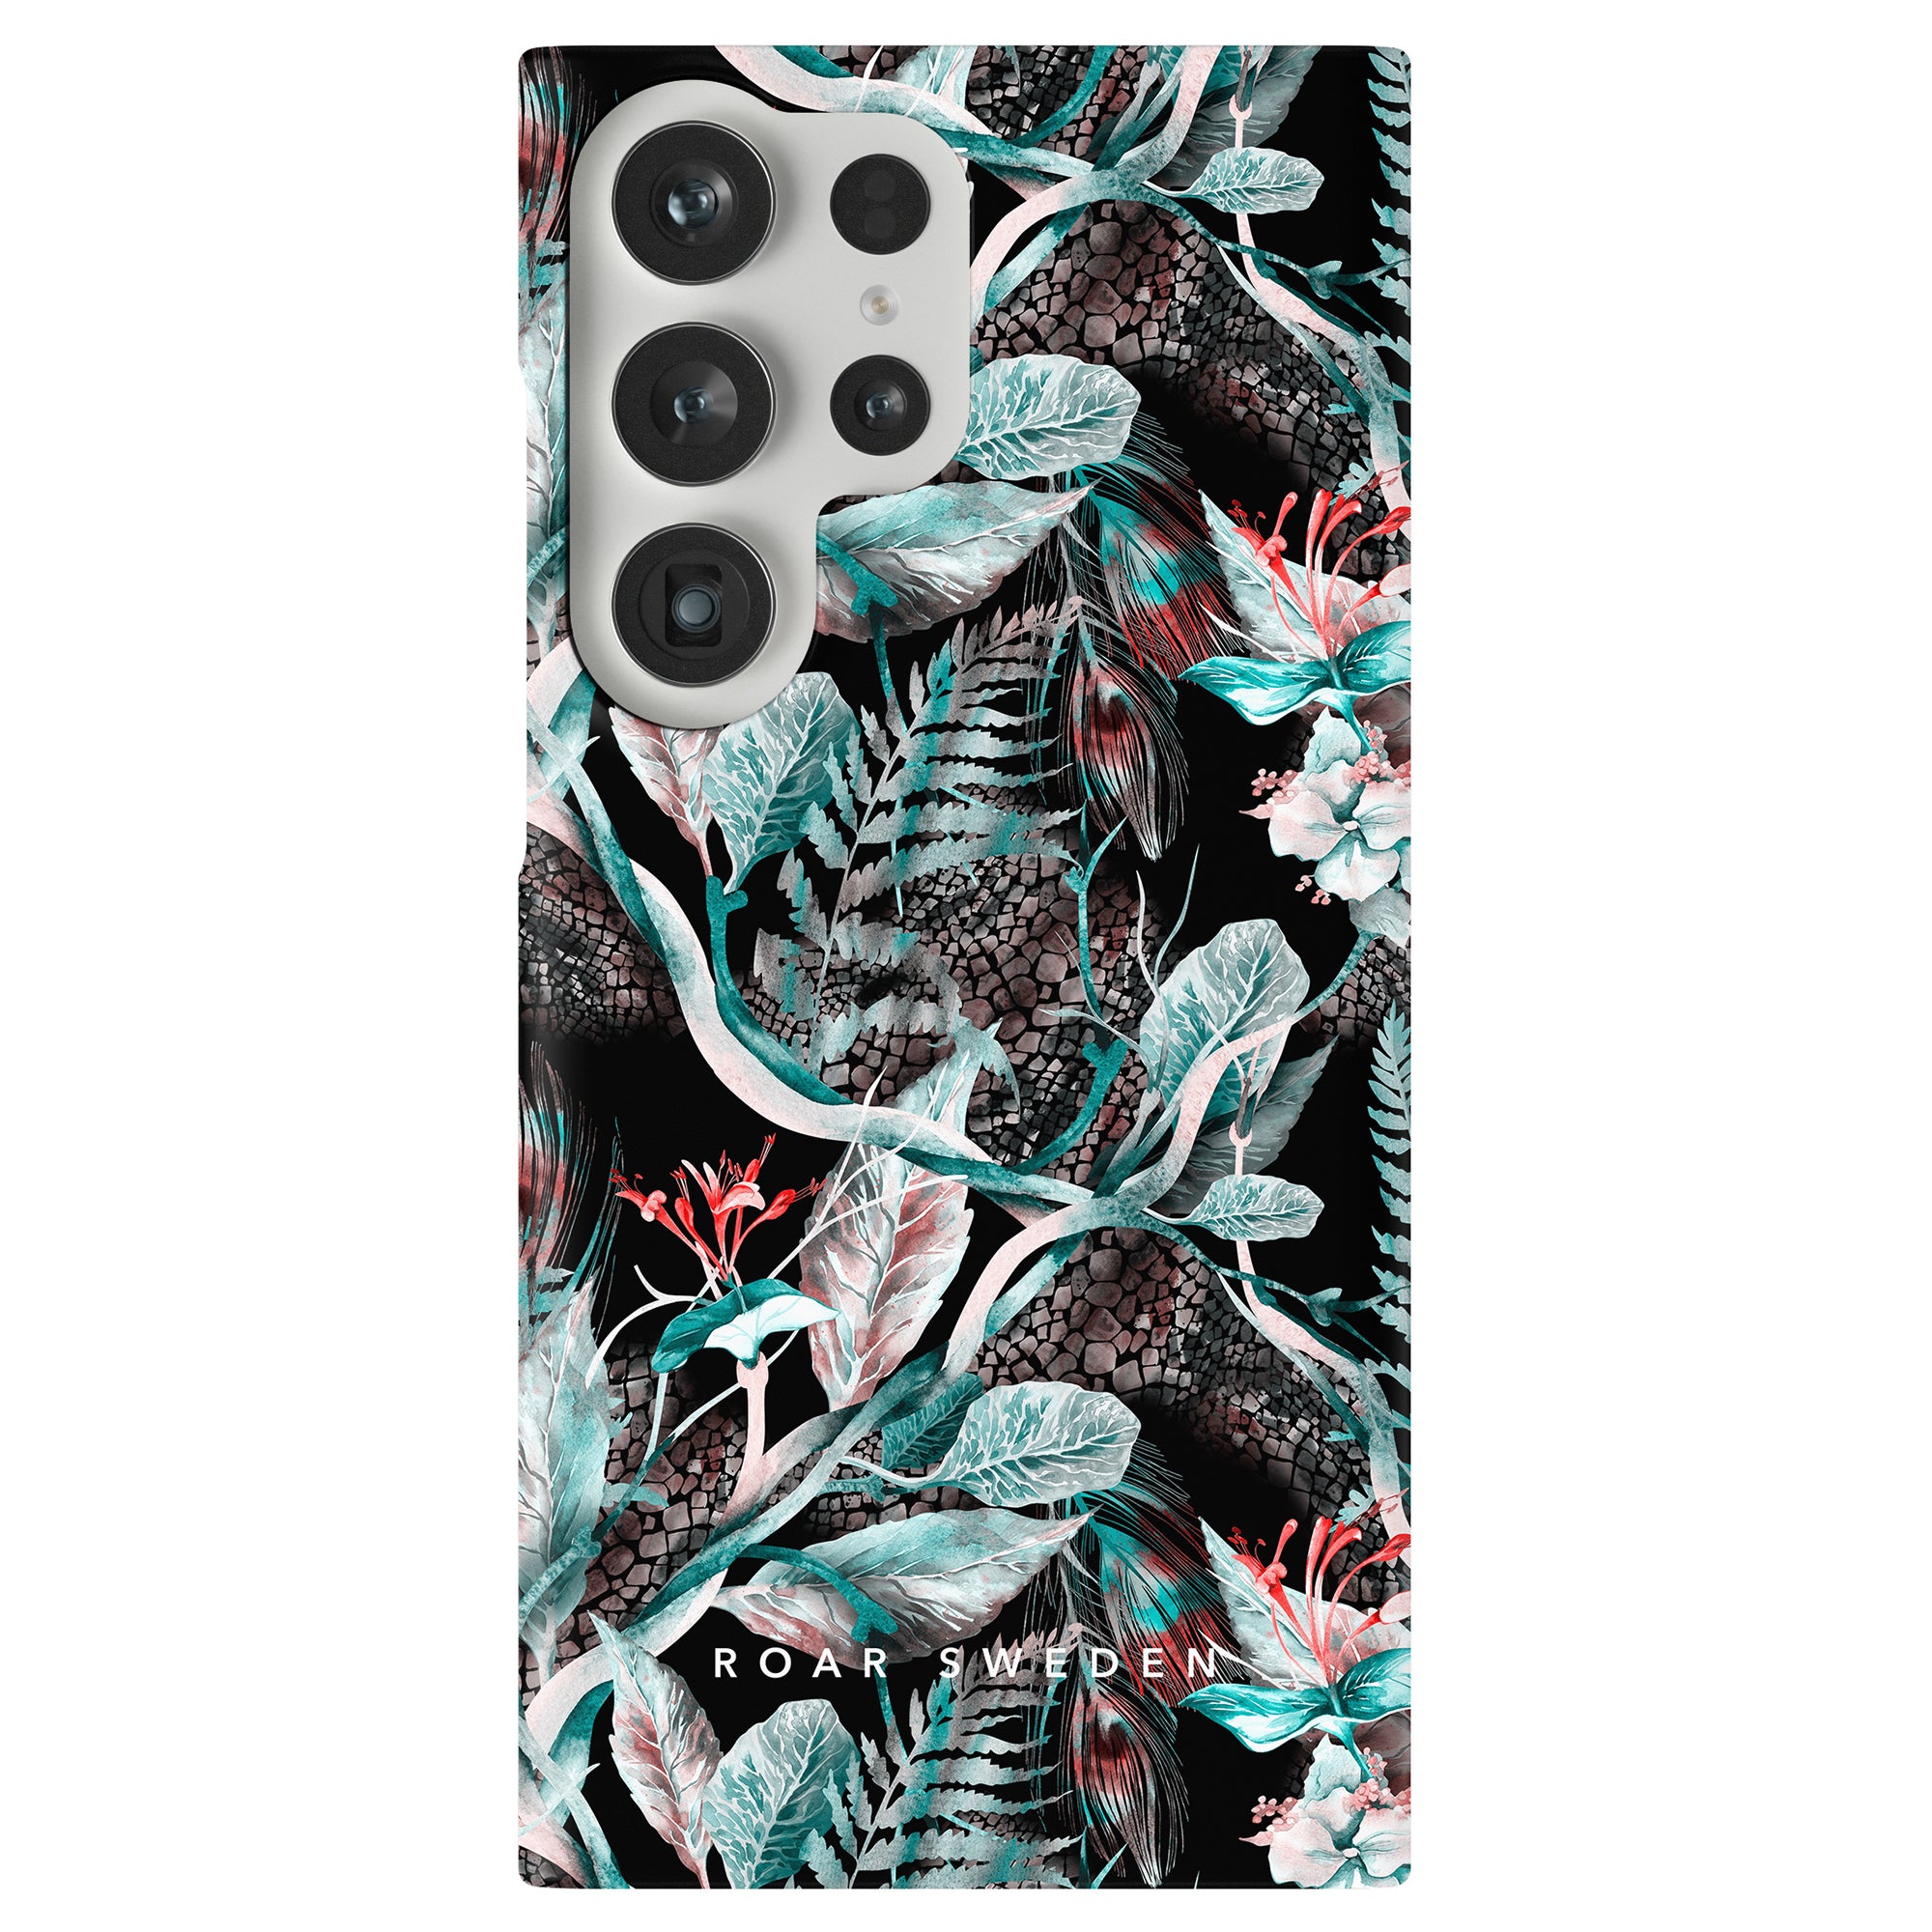 A Snake Jungle - Slim case with a trendy jungle pattern featuring tropical leaves and flowers. This high-quality and durable case provides full access to all buttons and ports on your smartphone, while also protecting it from scratches.